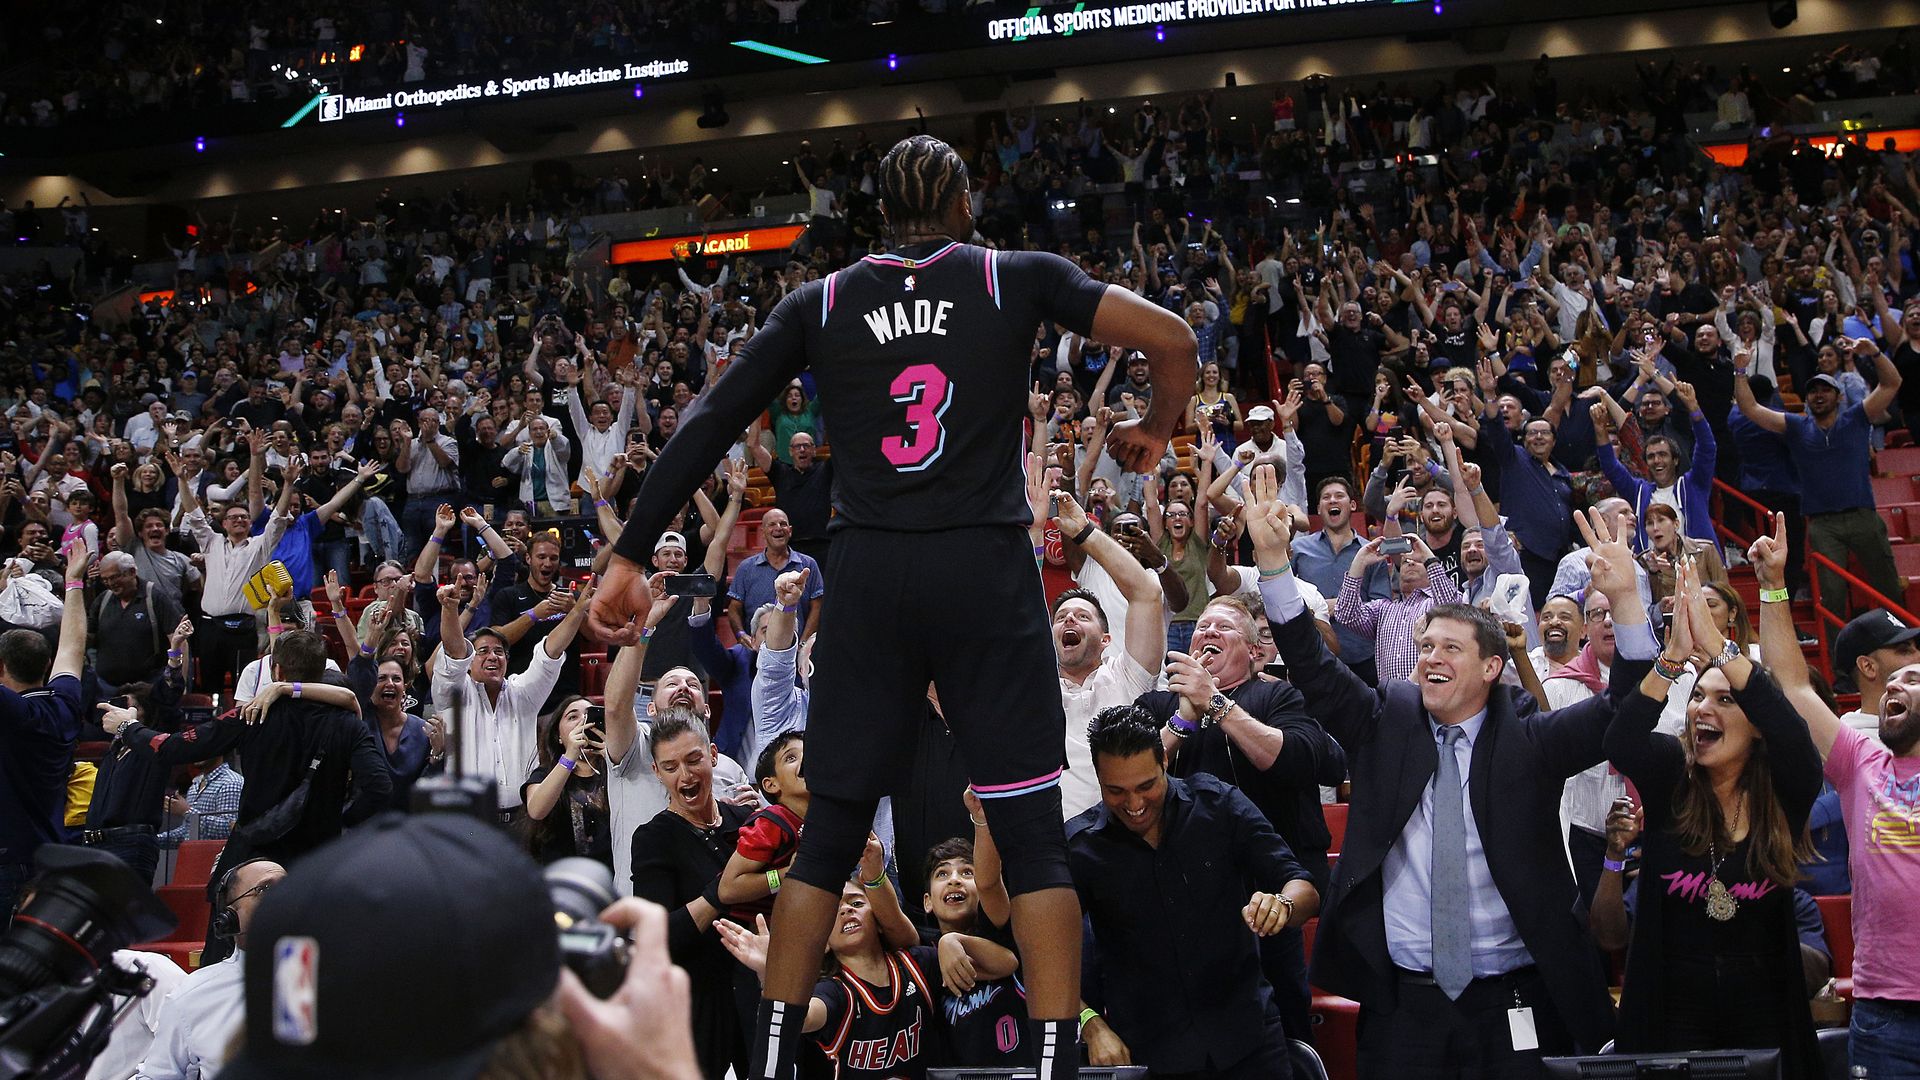 Dwyane Wade #3 of the Miami Heat celebrates after hitting a game-winning three pointer against the Golden State Warriors